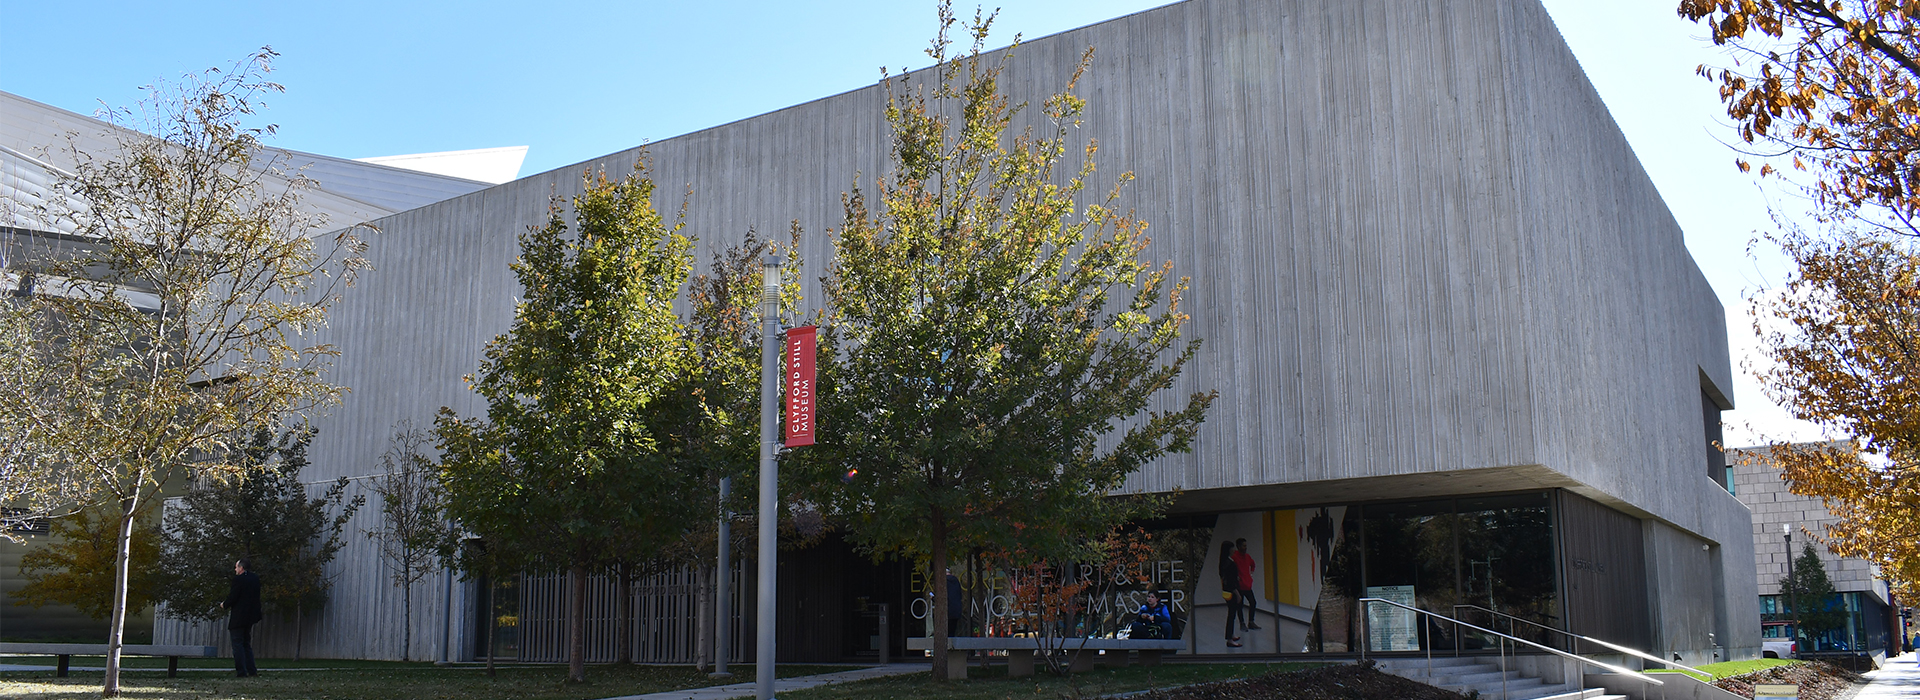 Photo of the exterior of the Clyfford Still Museum